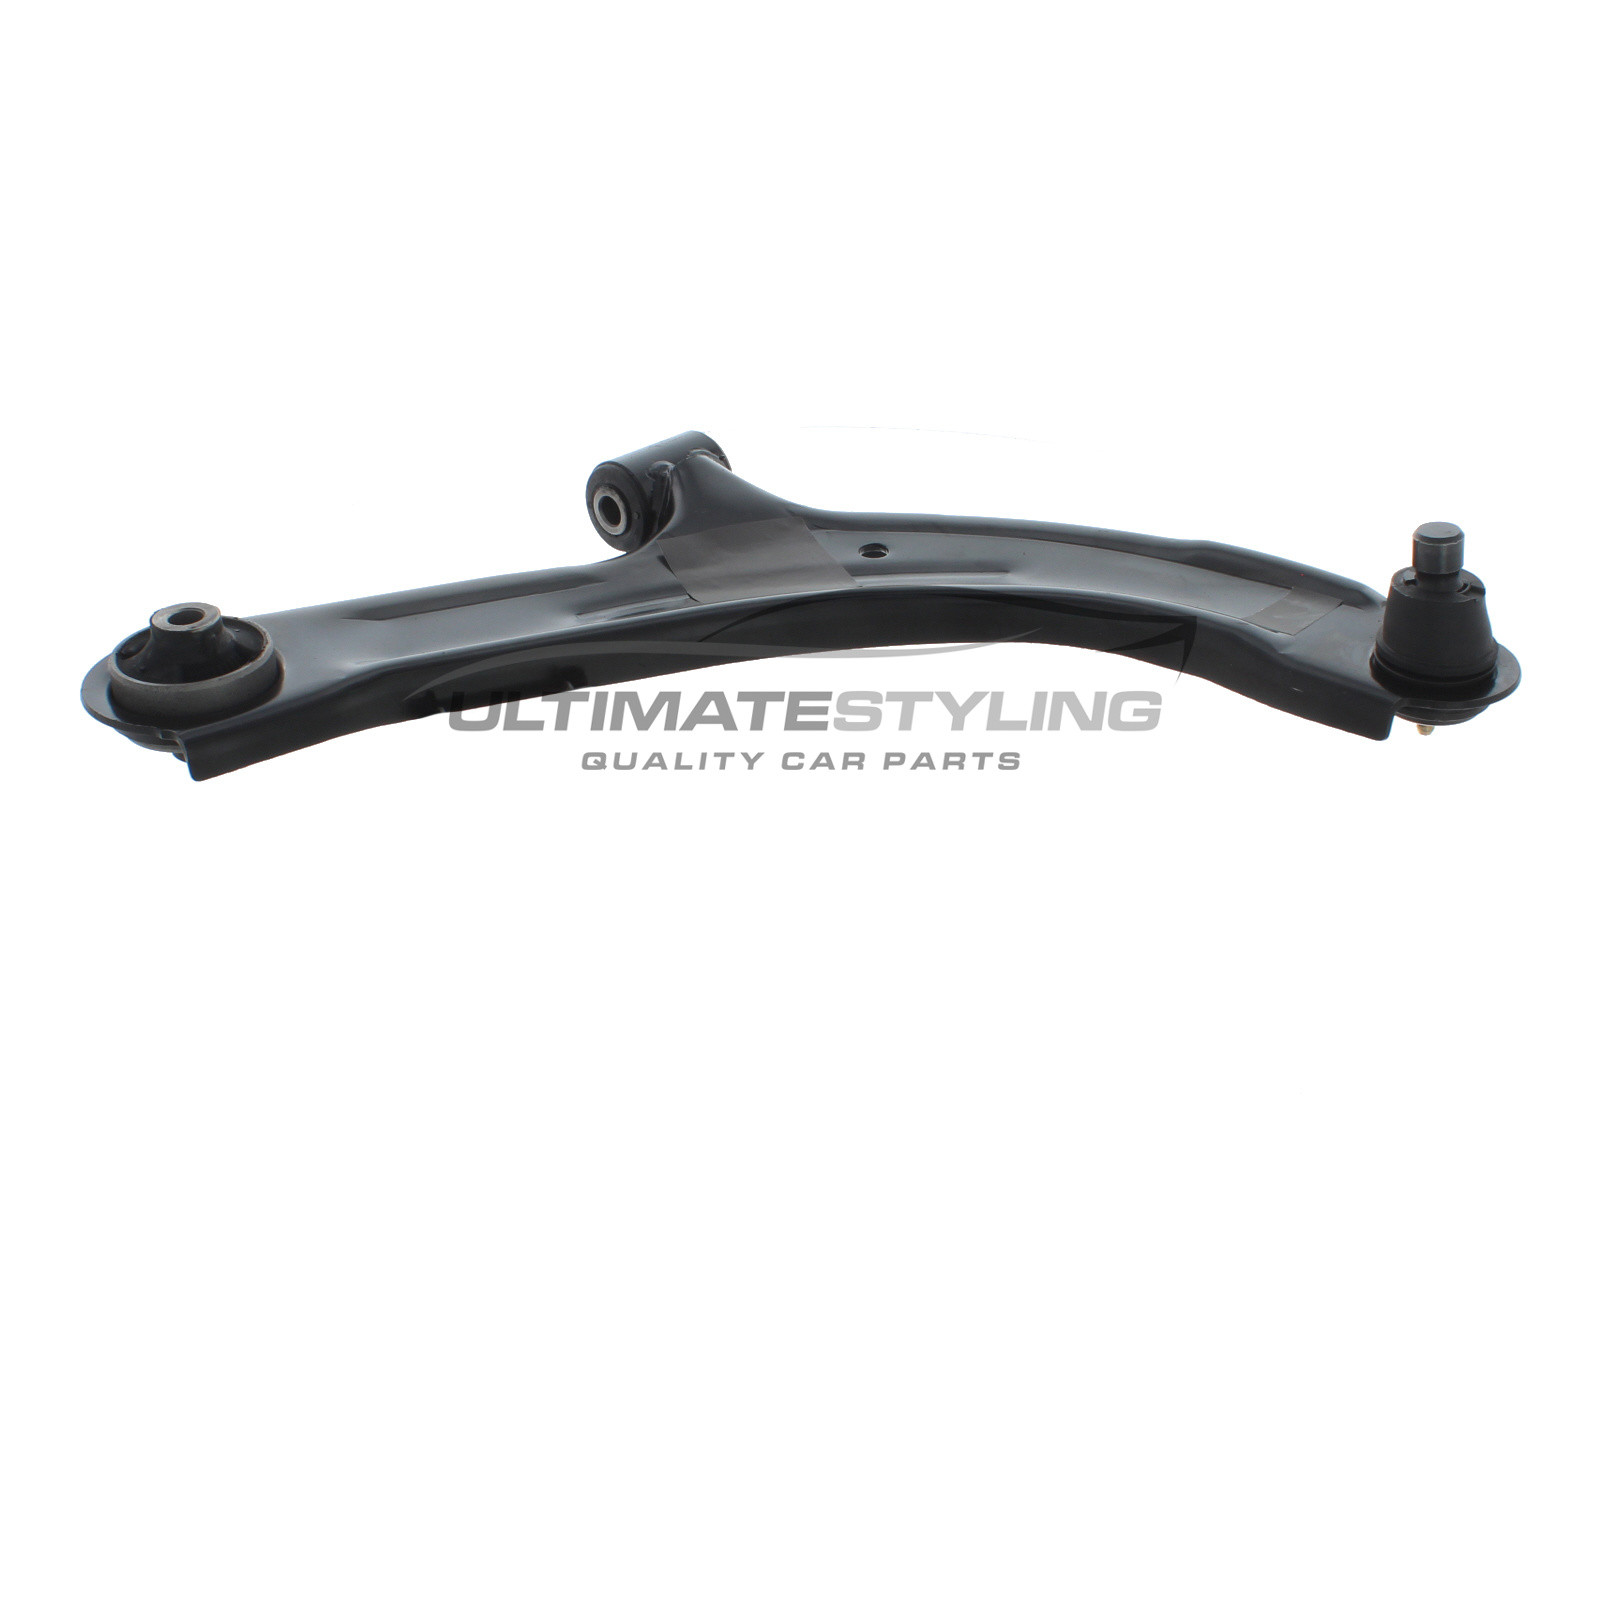 Nissan Cube 2009-2011, Nissan NV200 2009-3000 Front Lower Suspension Arm (Steel) Including Ball Joint and Rear Bush Driver Side (RH)